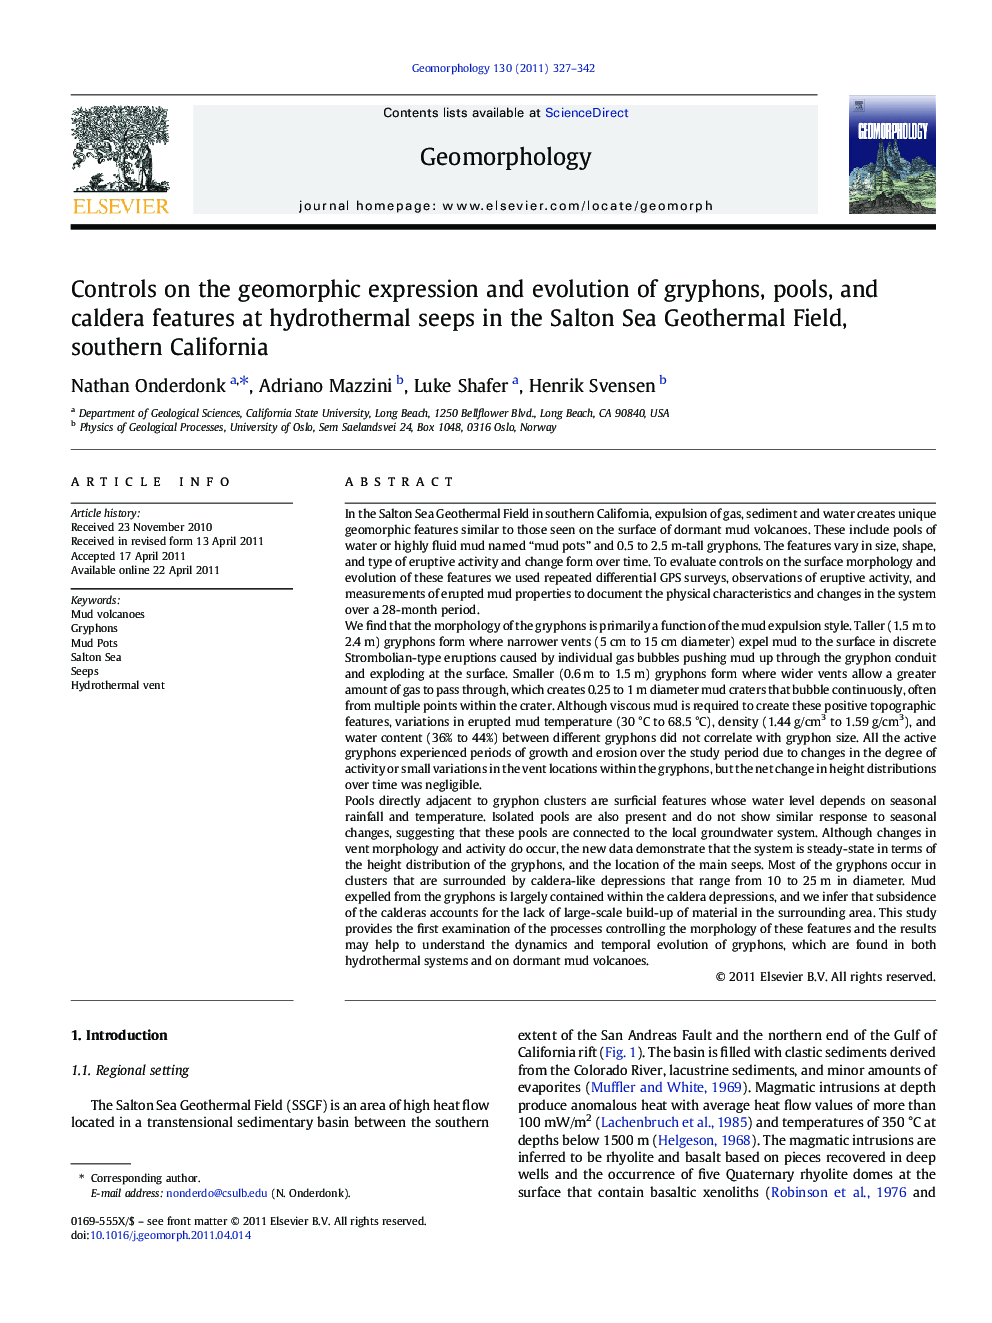 Controls on the geomorphic expression and evolution of gryphons, pools, and caldera features at hydrothermal seeps in the Salton Sea Geothermal Field, southern California